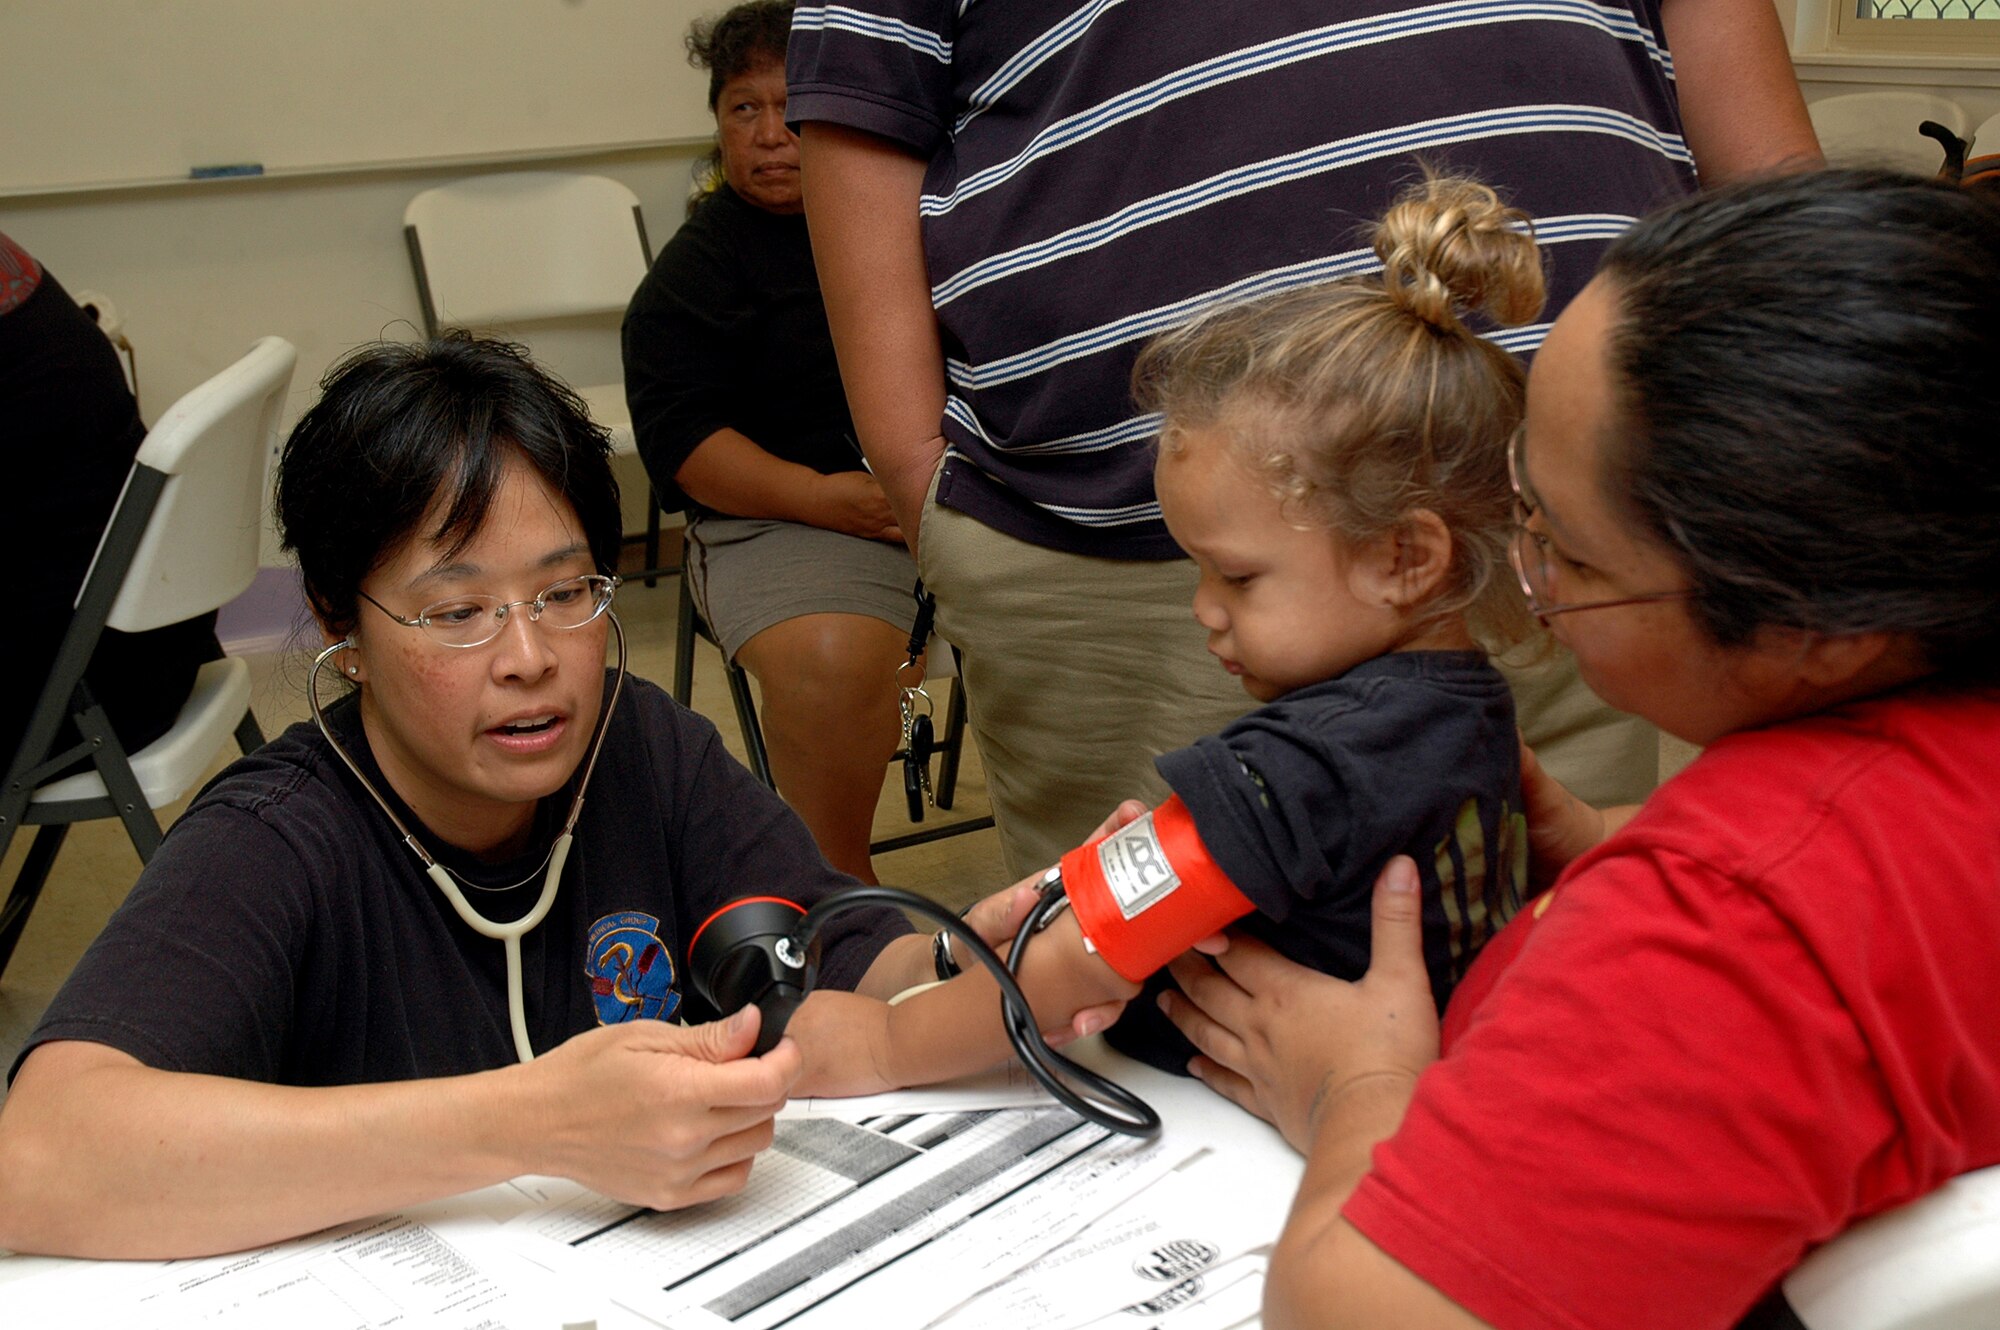 Master Sgt.  Kimberly Santos, aerospace medical technician, 154th Medical Group, checks the blood pressure of one of the young patients, whose parents took advantage of the free medical screenings offered by the Hawaii Air National Guard as part of the Hawaii Medical Innovative Readiness Training July 16, in Waianae, Hawaii. Innovative Readiness Training is an opportunity for Guard members to complete mission essential training while performing free medical services to the medically underserved. (U.S. Air Force photo/Tech. Sgt. Betty J. Squatrito-Martin)